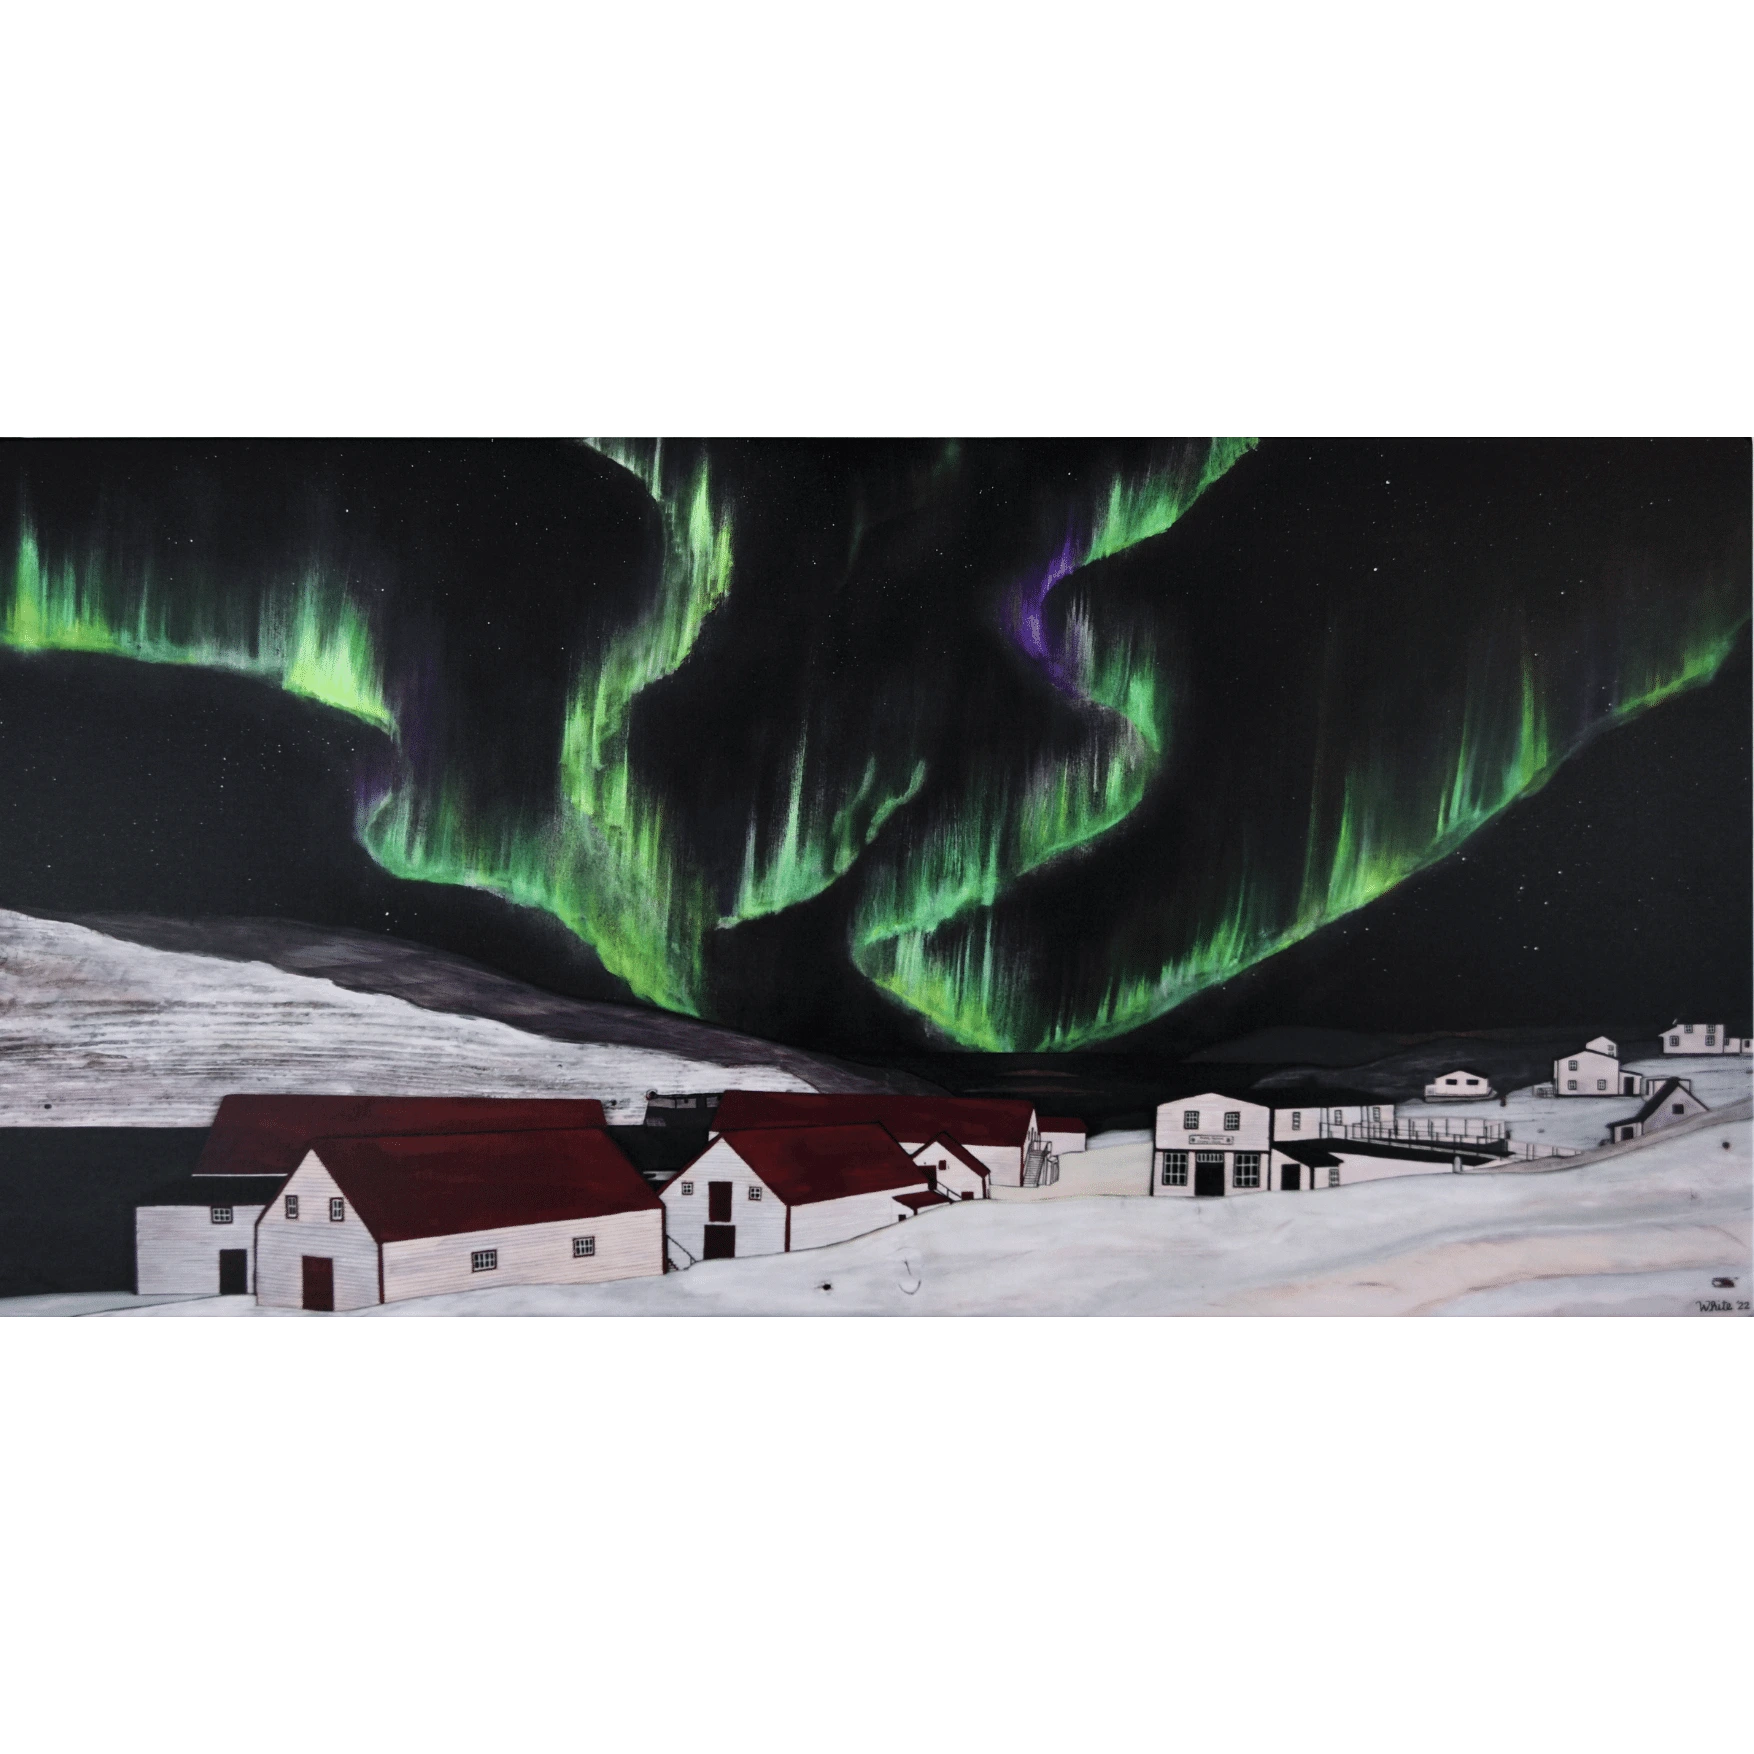  "The Northern Lights of Battle Harbour" reproduction print captures the vibrant colours of the aurora borealis over historic Battle Harbour during winter.